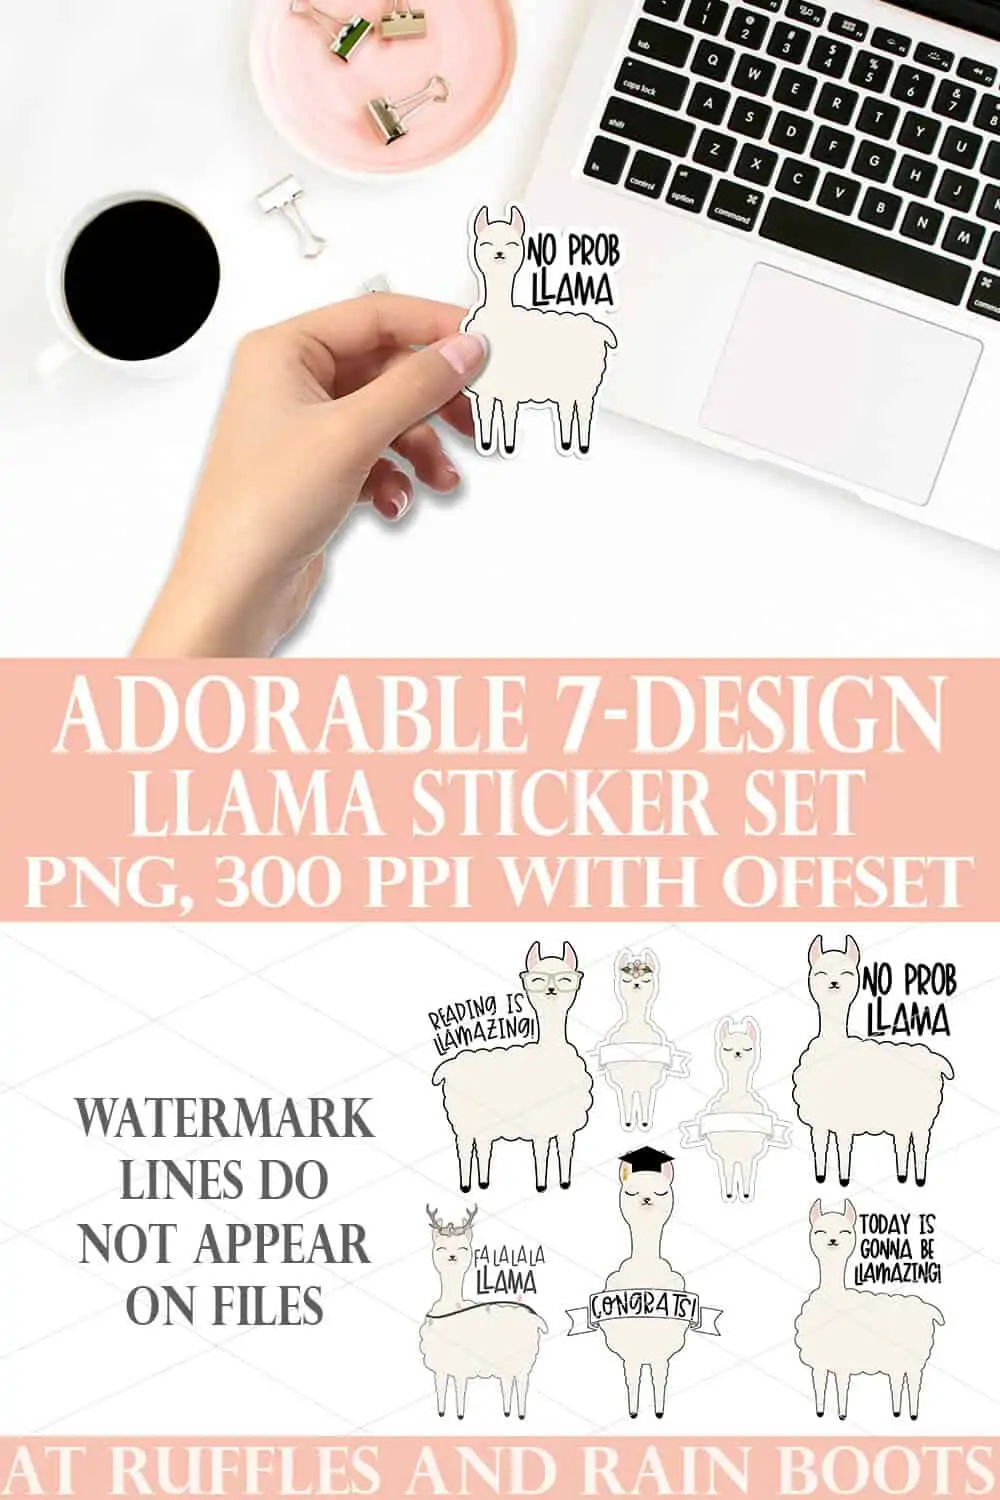 collage of woman holding no prob llama sticker over laptop on white desk and 7 llama sticker designs with text which reads adorable 7 design llama sticker set png 300 ppi with offset